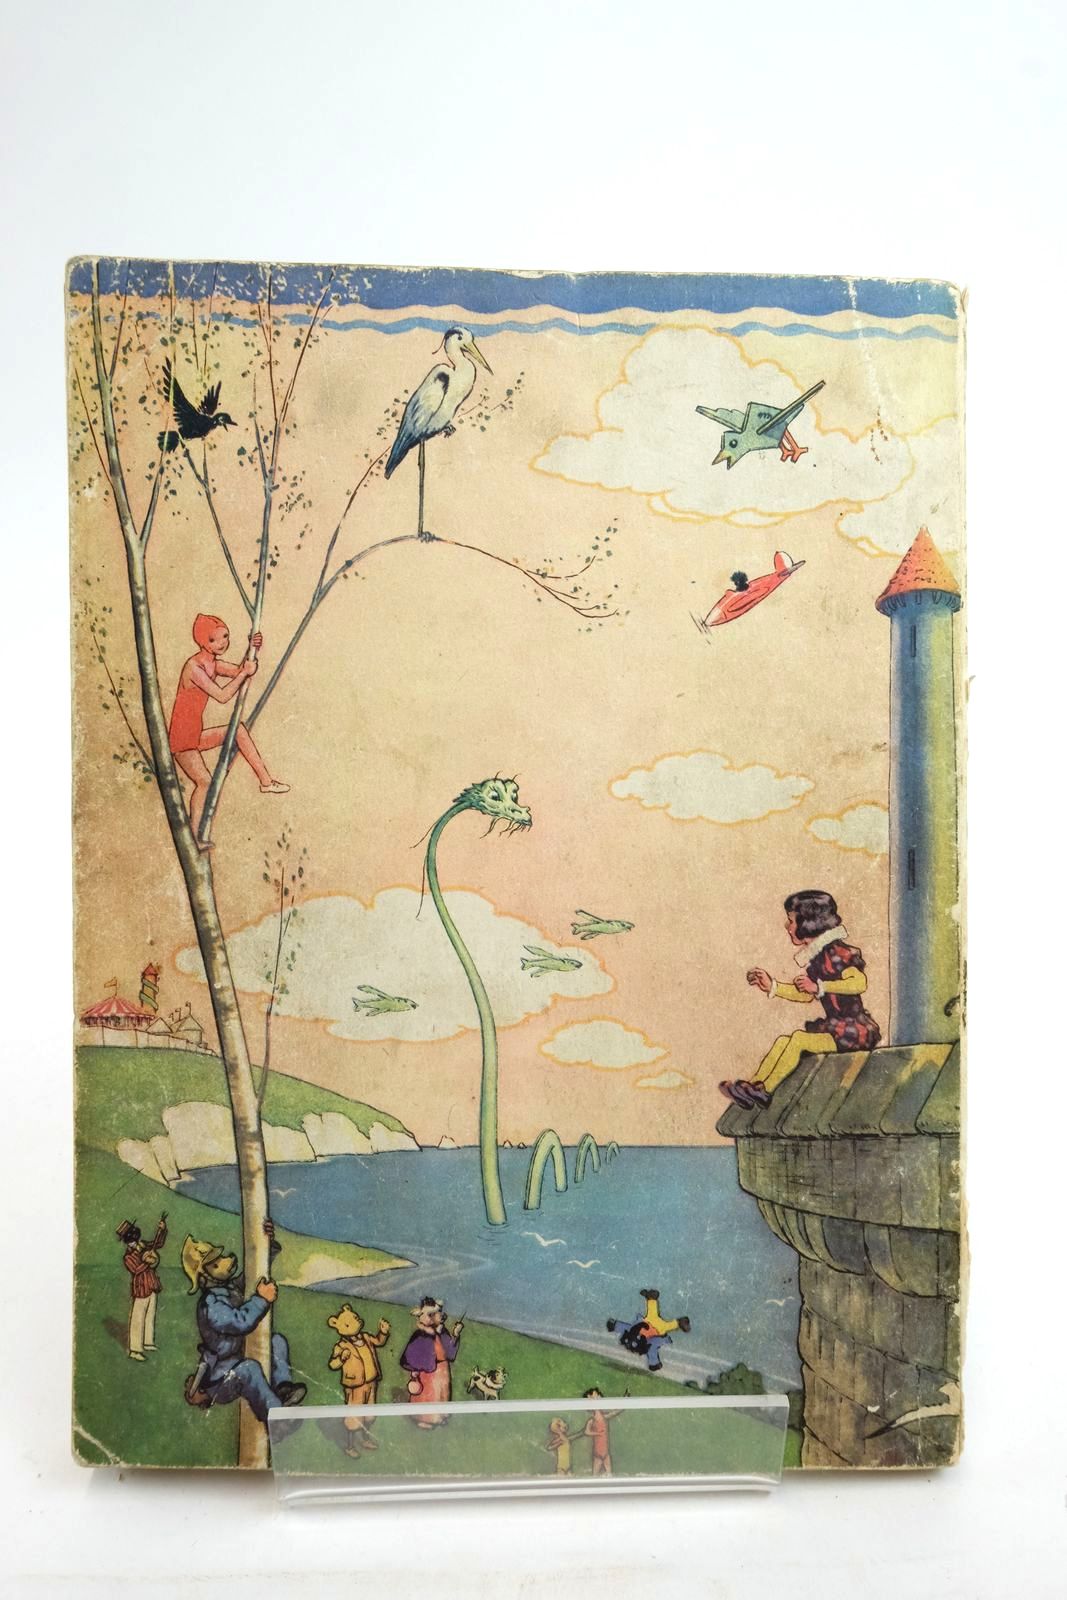 Photo of RUPERT ANNUAL 1942 - MORE ADVENTURES OF RUPERT written by Bestall, Alfred illustrated by Bestall, Alfred published by Daily Express (STOCK CODE: 2137387)  for sale by Stella & Rose's Books